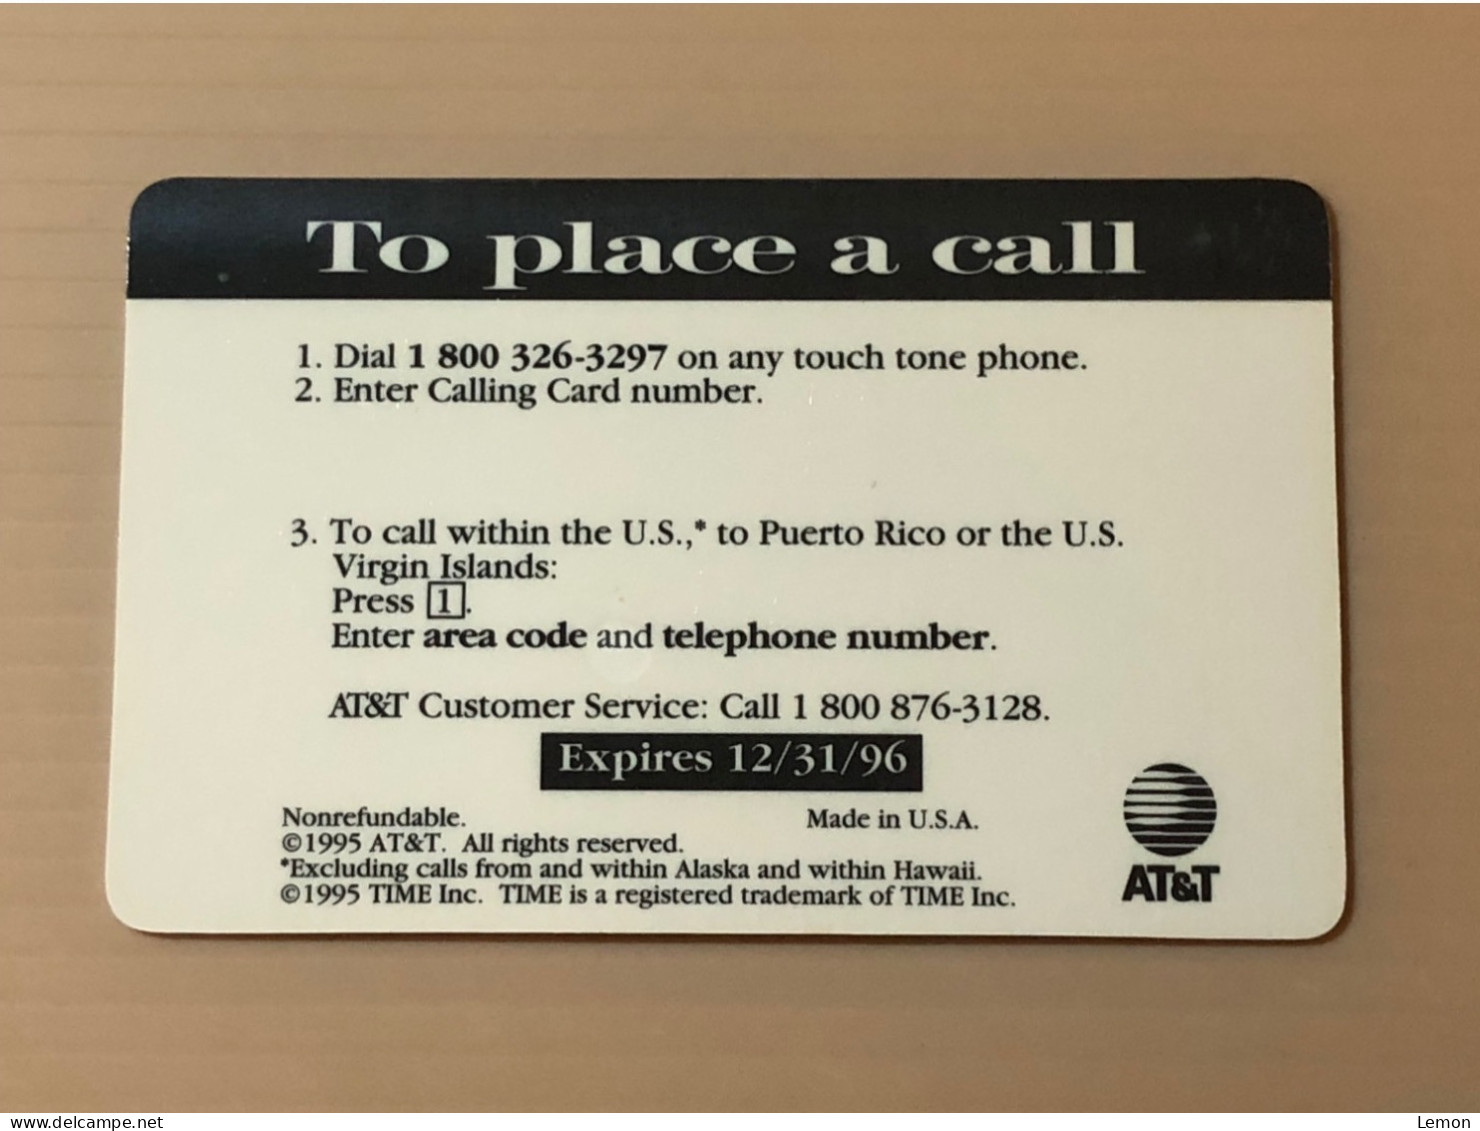 Mint USA UNITED STATES America Prepaid Telecard Phonecard, AT&T TIME Calling Card SAMPLE CARD, Set Of 1 Mint Card - Colecciones